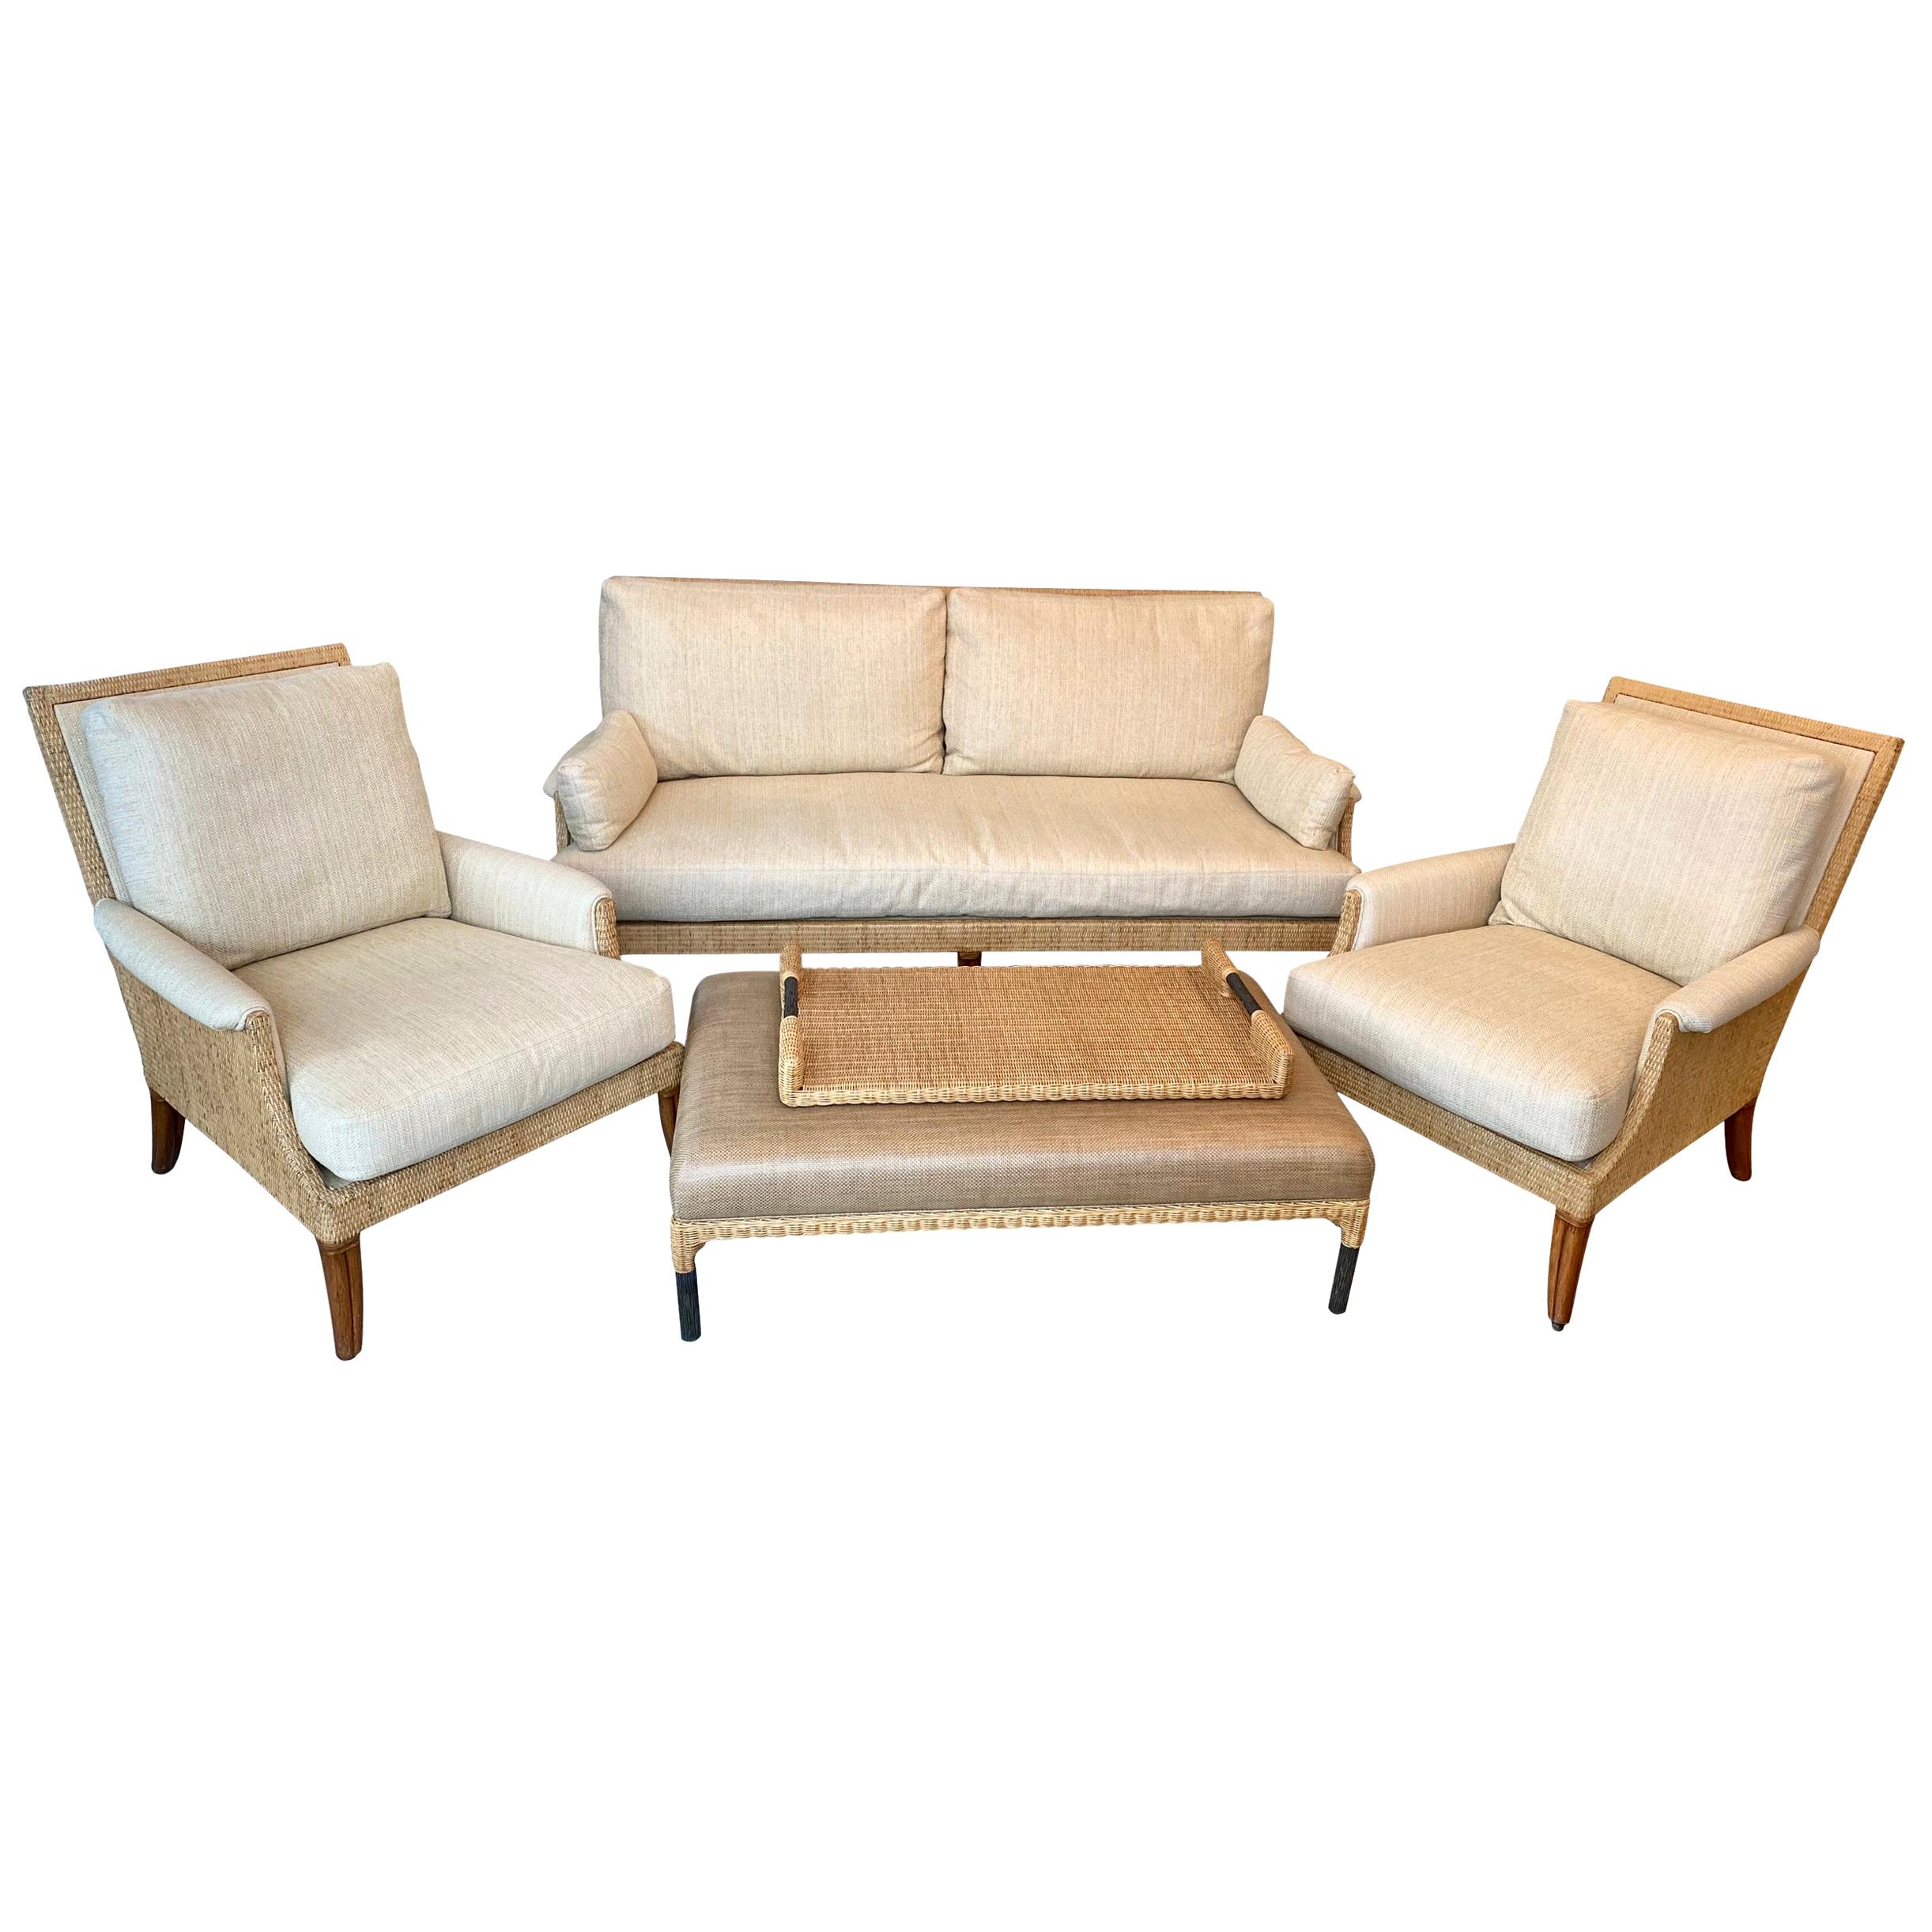 McGuire Sofa, Pair of Chairs, Ottoman, and Tray